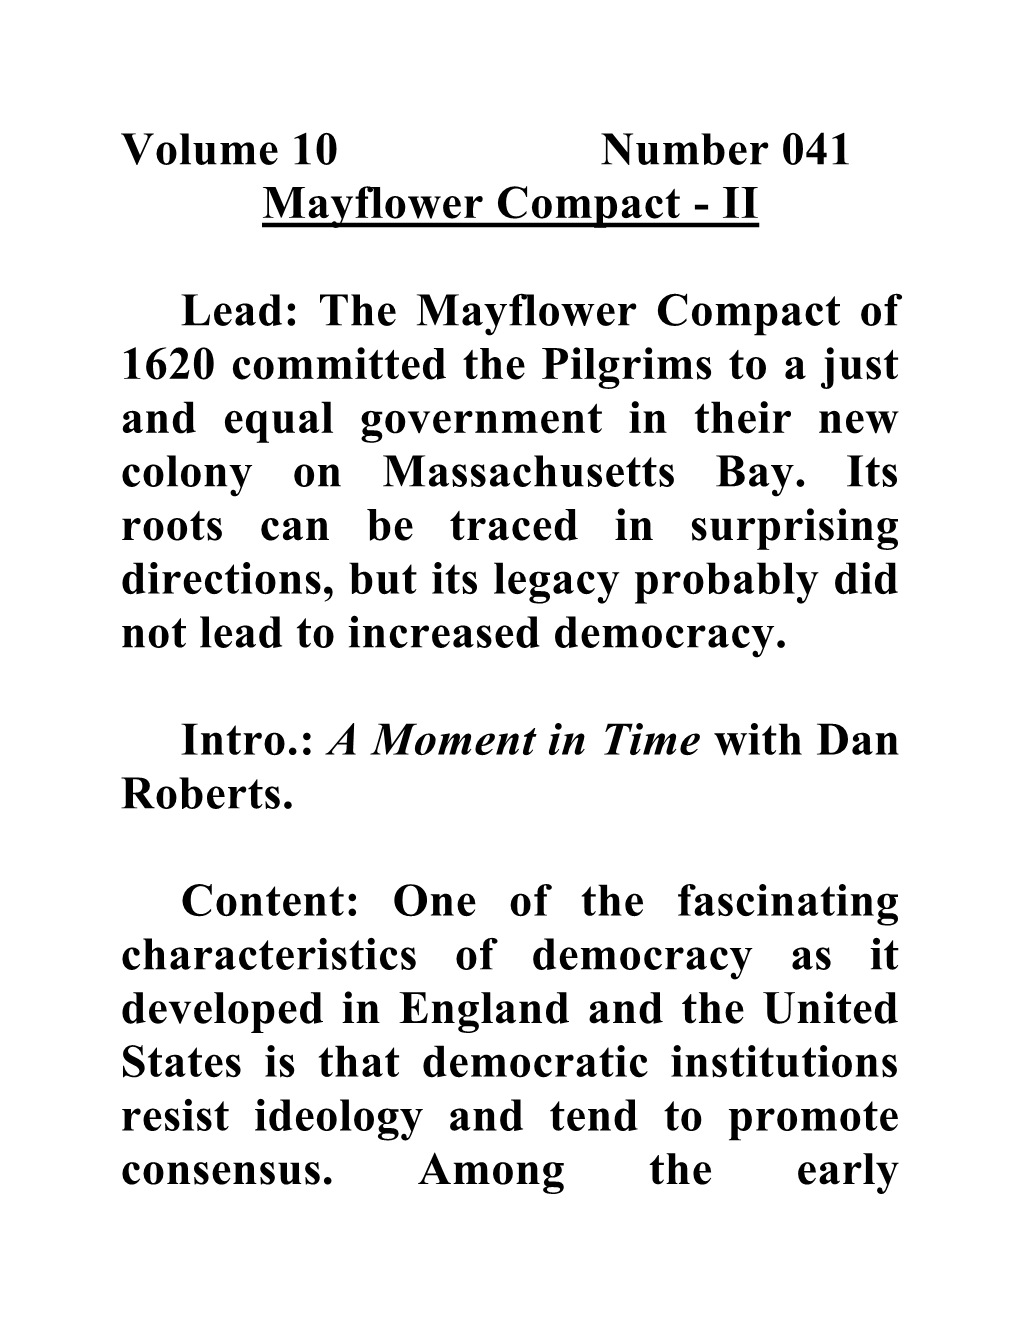 The Mayflower Compact of 1620 Committed the Pilgrims to a Just and Equal Government in Their New Colony on Massachusetts Bay